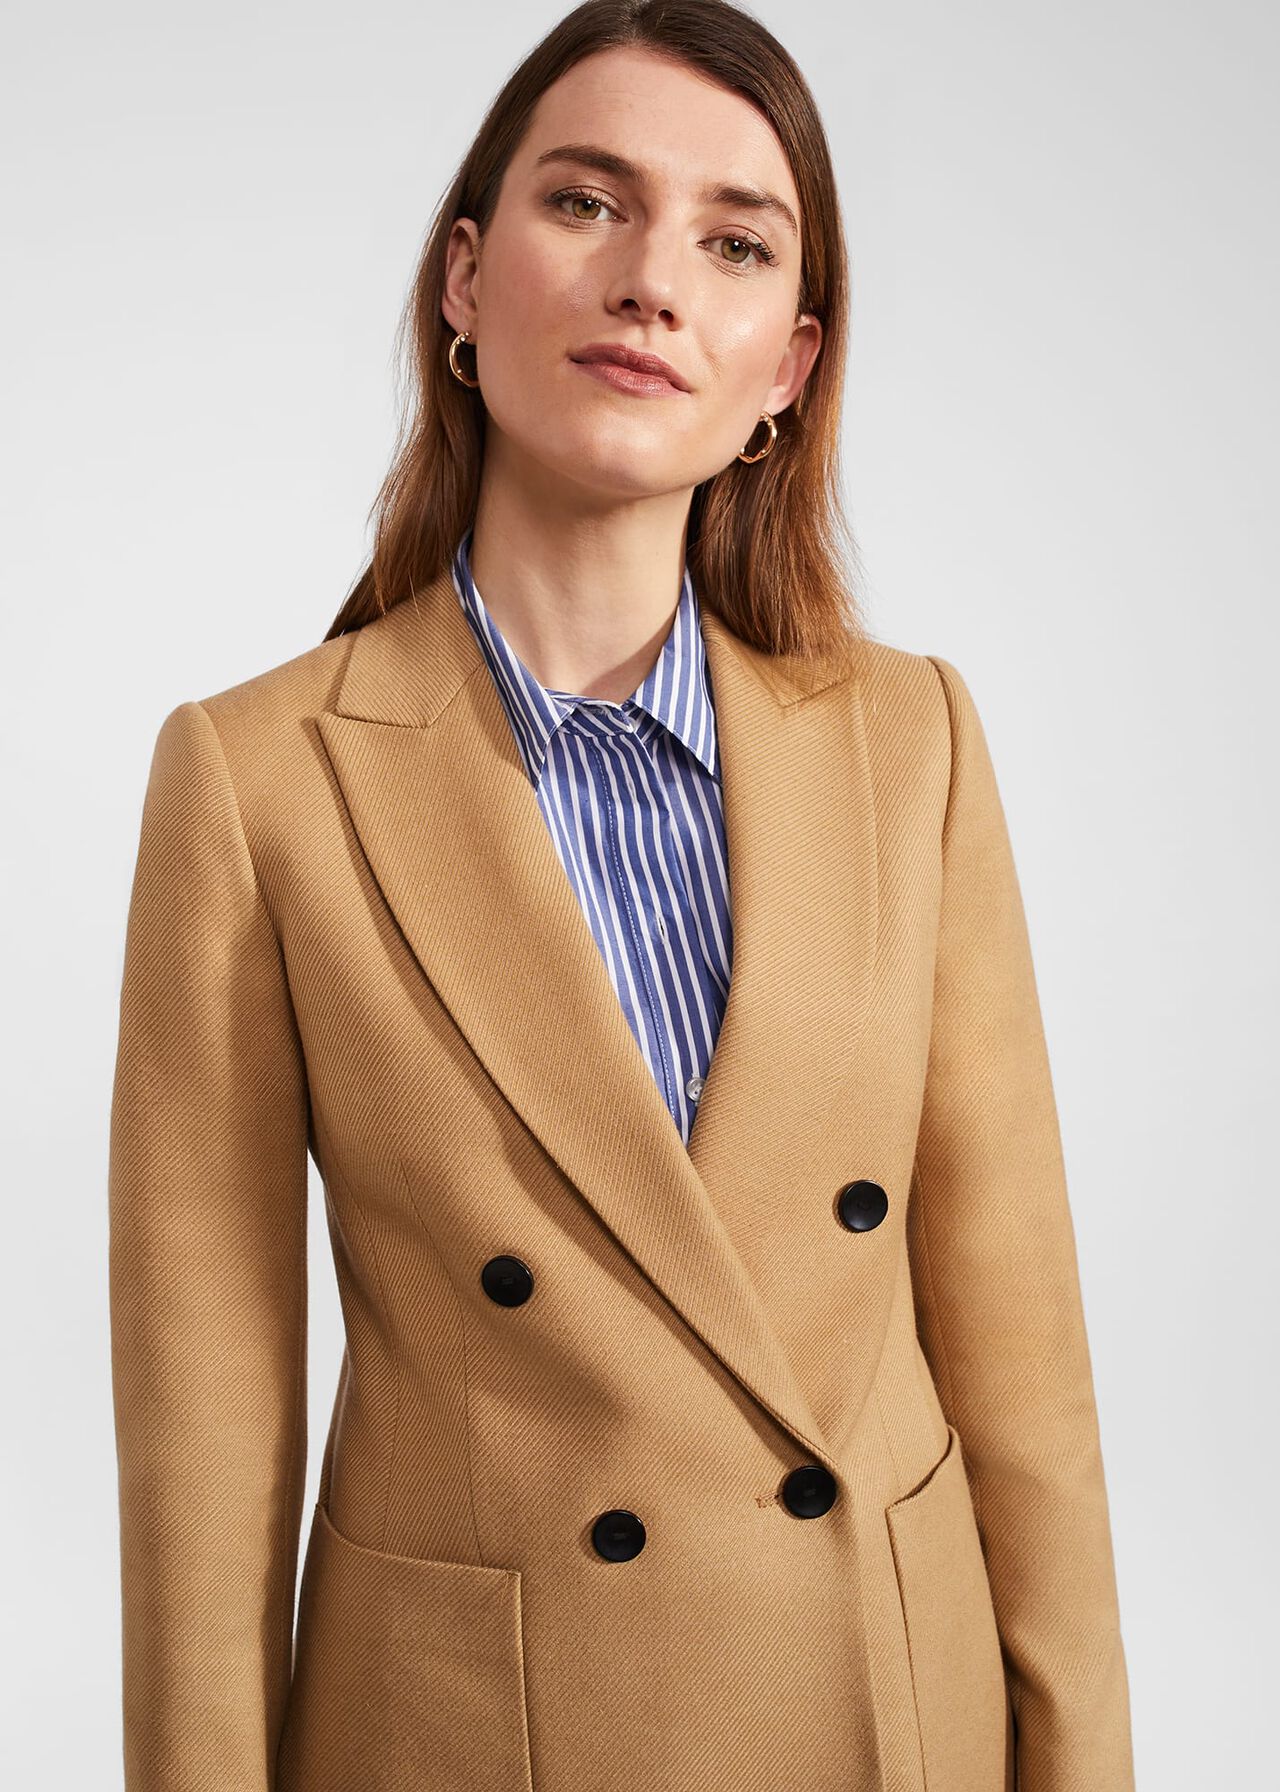 Digby Jacket With Wool, Camel, hi-res